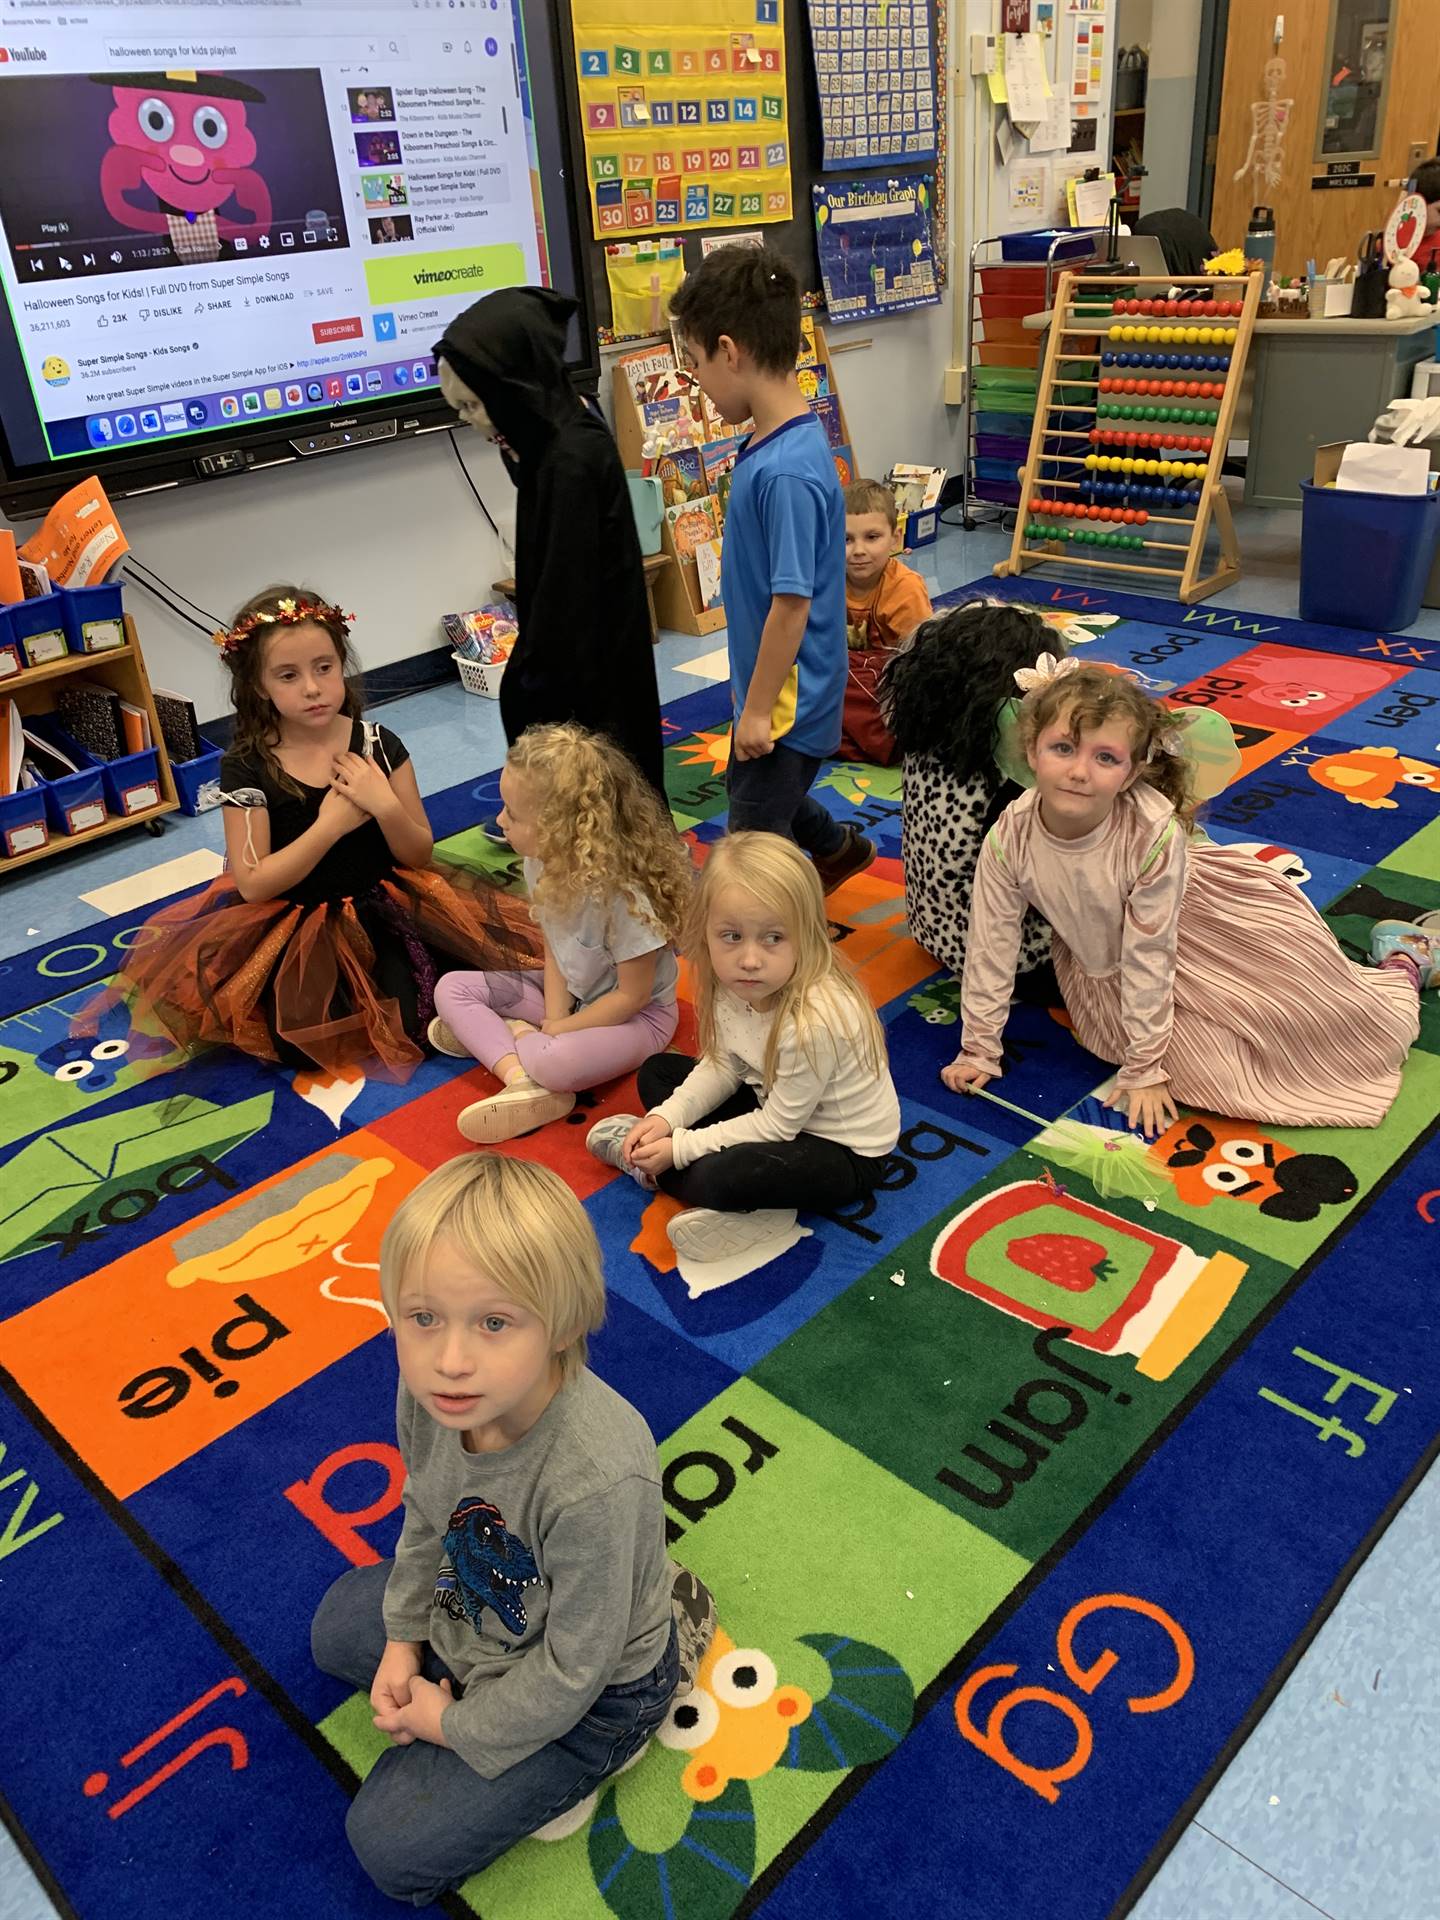 students dressed up in halloween costumes on a bright colored rug